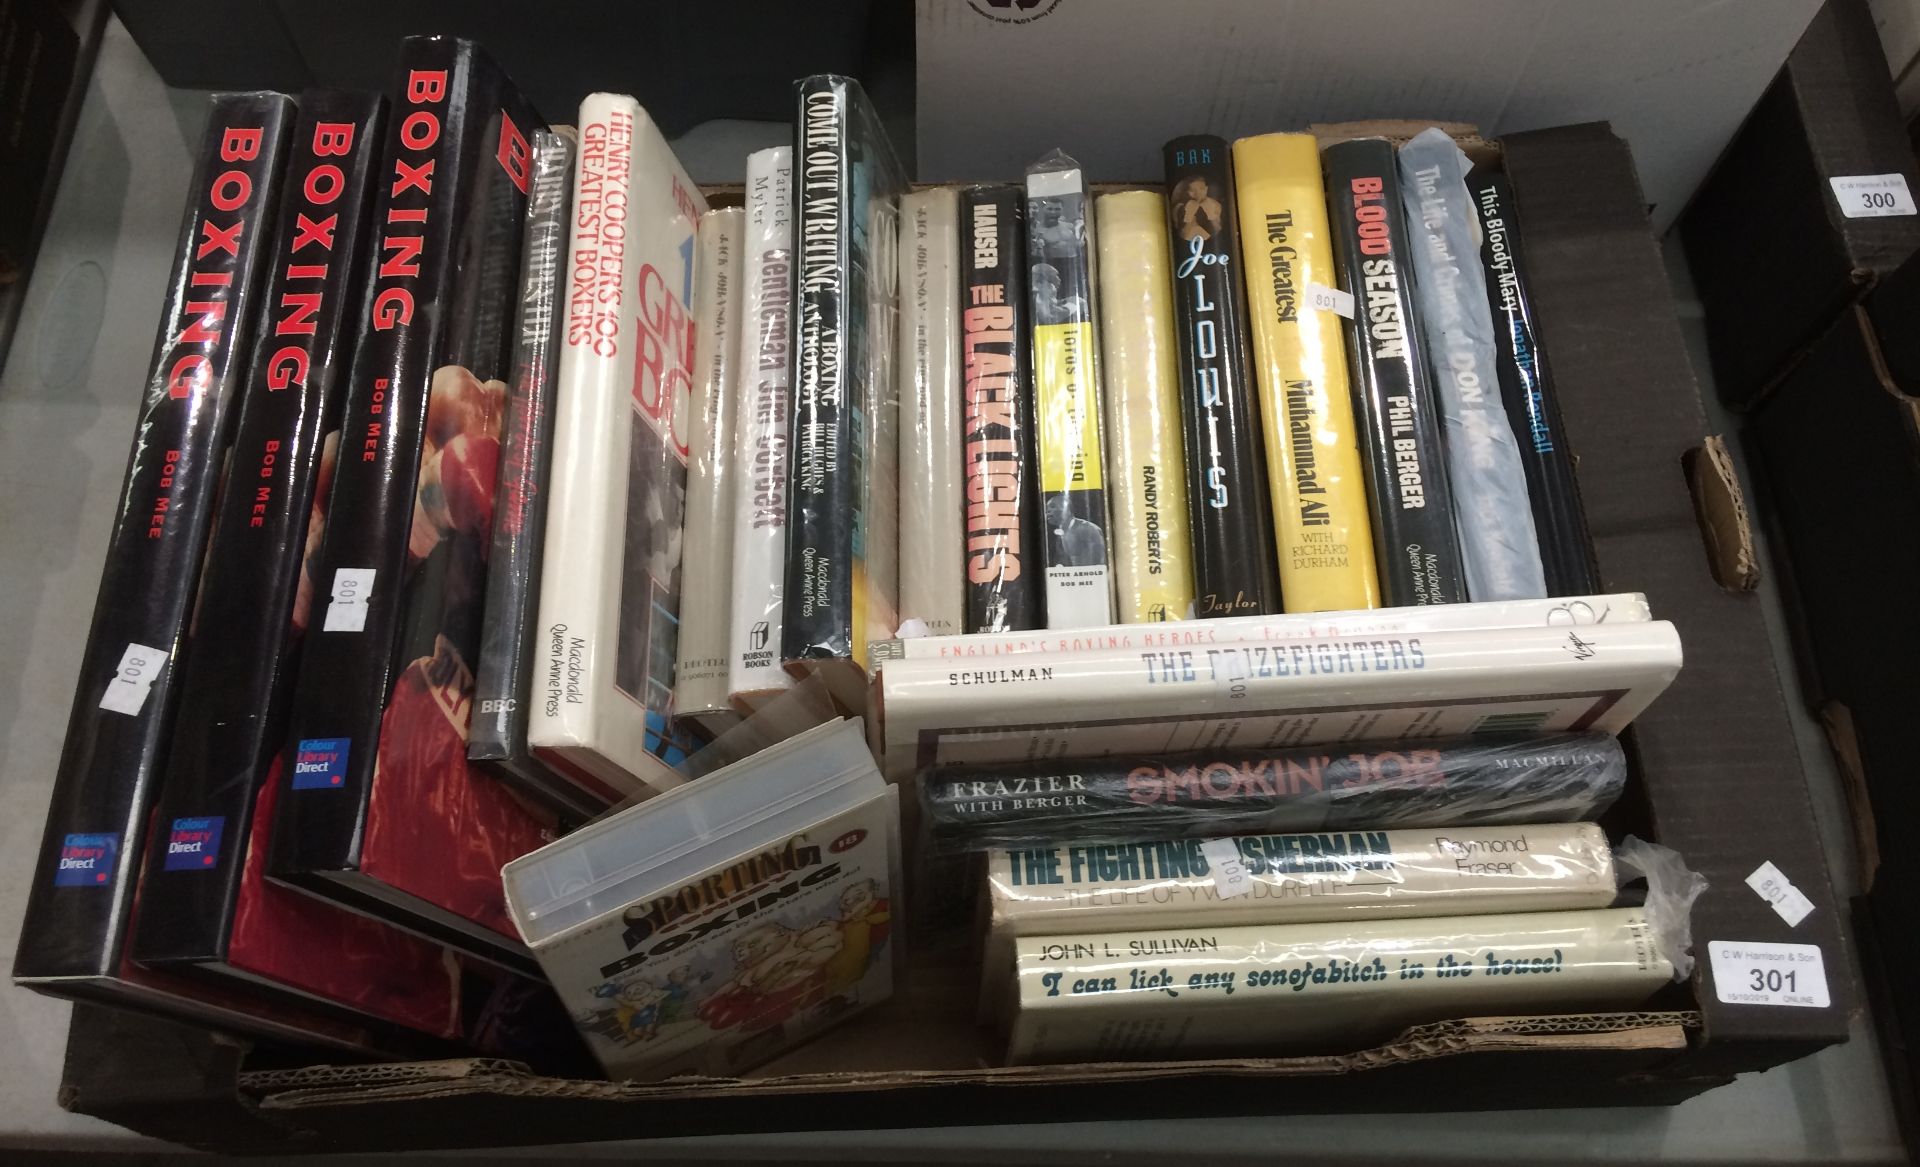 Contents to box - books on boxing 'Gentl